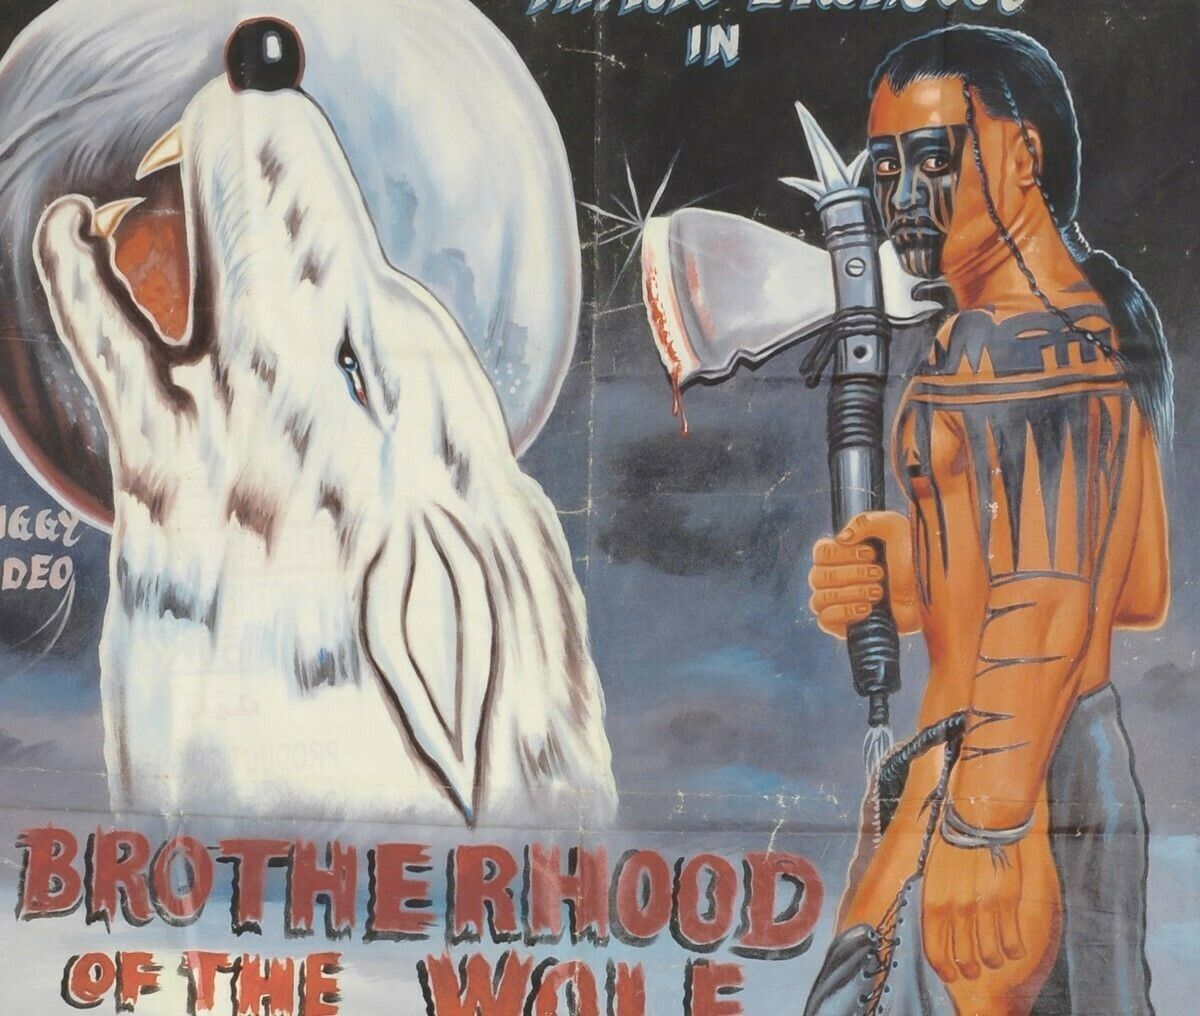 BROTHERHOOD OF THE WOLF GHANA MOVIE POSTER HAND PAINTED FOR THE LOCAL CINEMA DETAILS